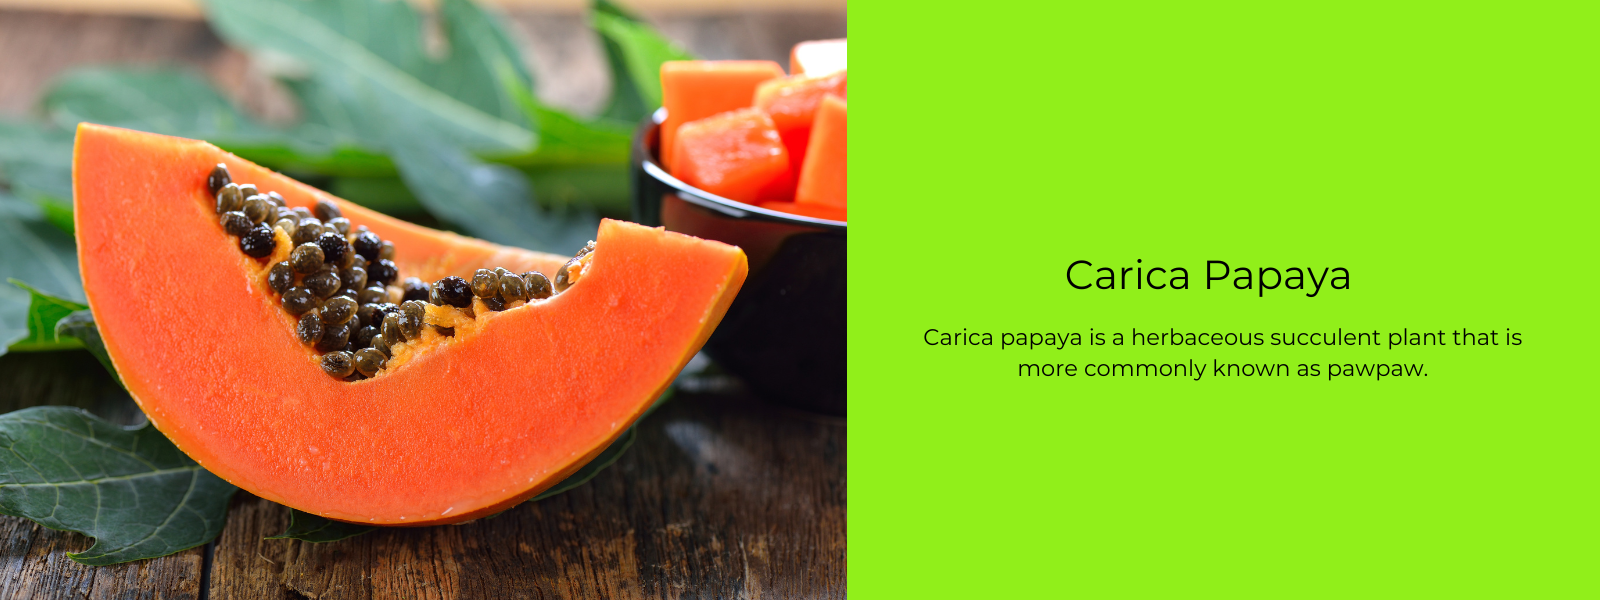 Carica Papaya – Health Benefits, Uses and Important Facts